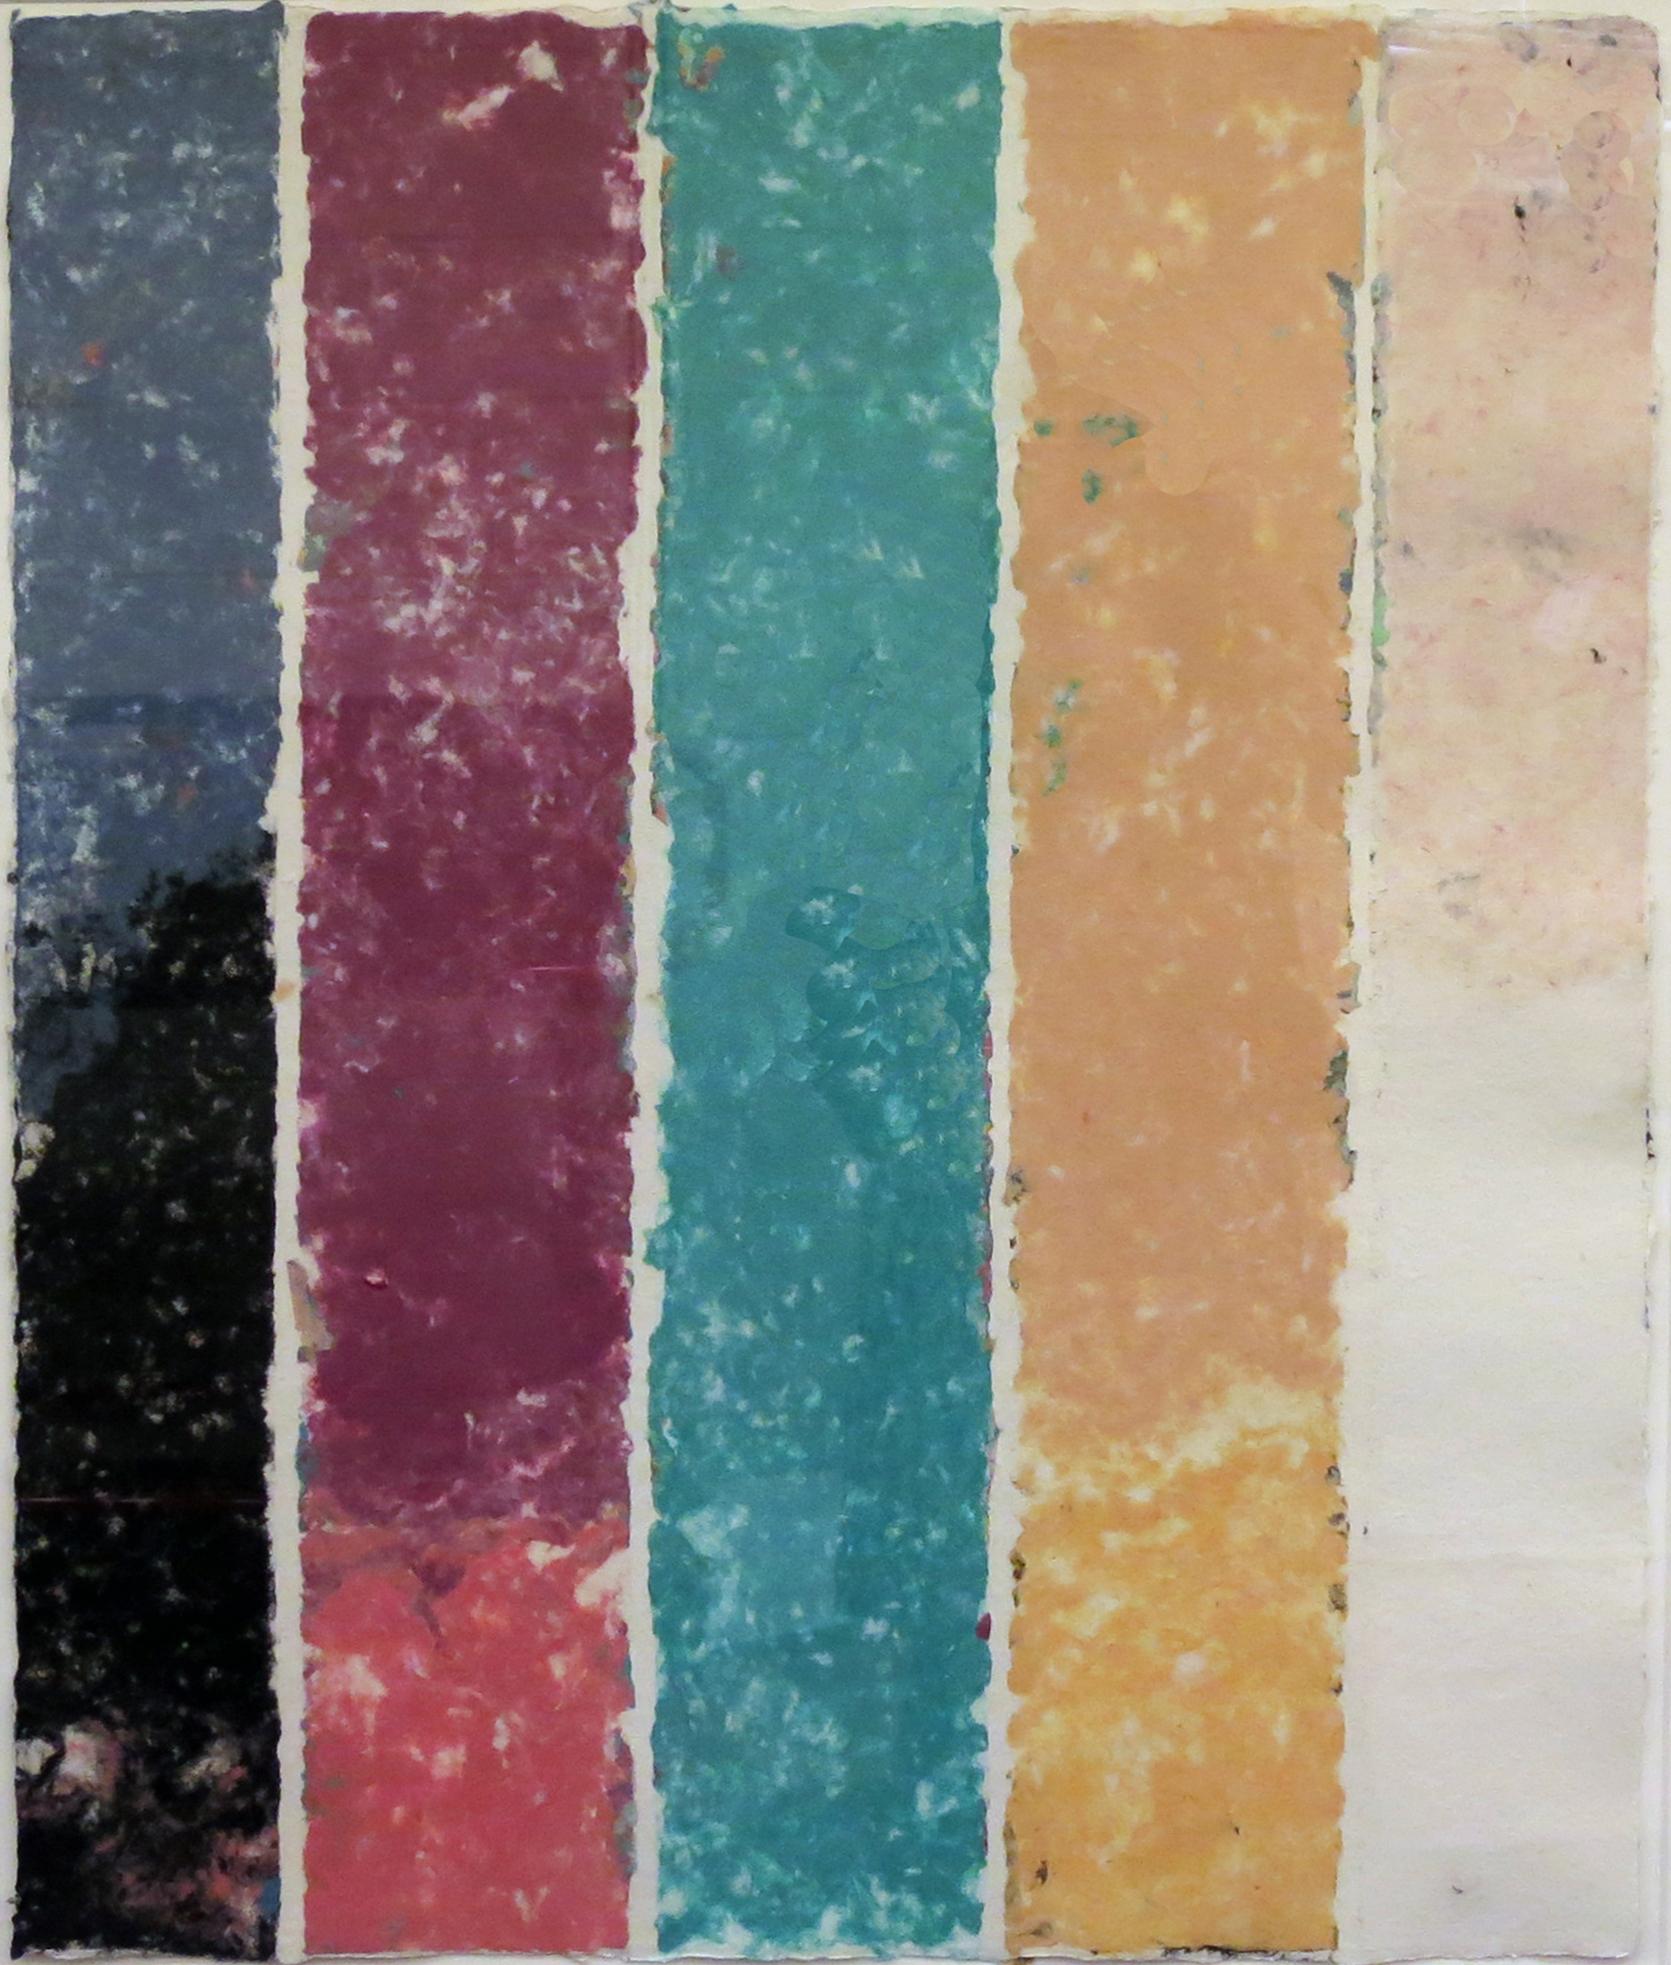 This work is unique and part of a series of striped works all titled with the prefix "PK" followed by a dash and a number. It is composed of five layers of colored pressed paper pulp and was created at Tyler Graphics in Bedford, New York. Noland is